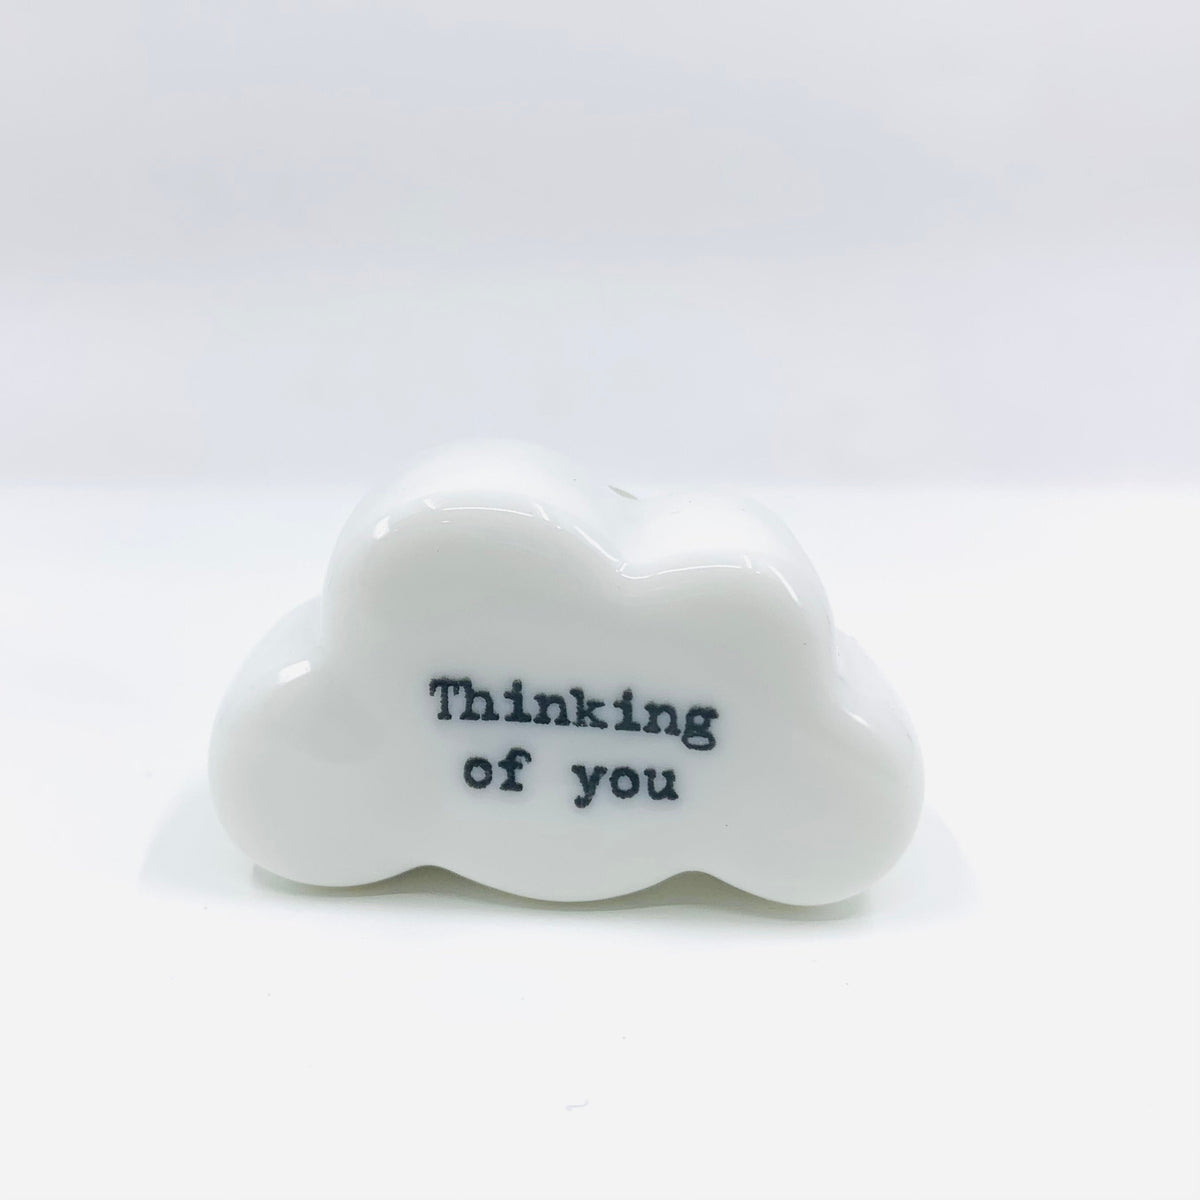 Little Porcelain Cloud Figures Miniature East of India Thinking of you 